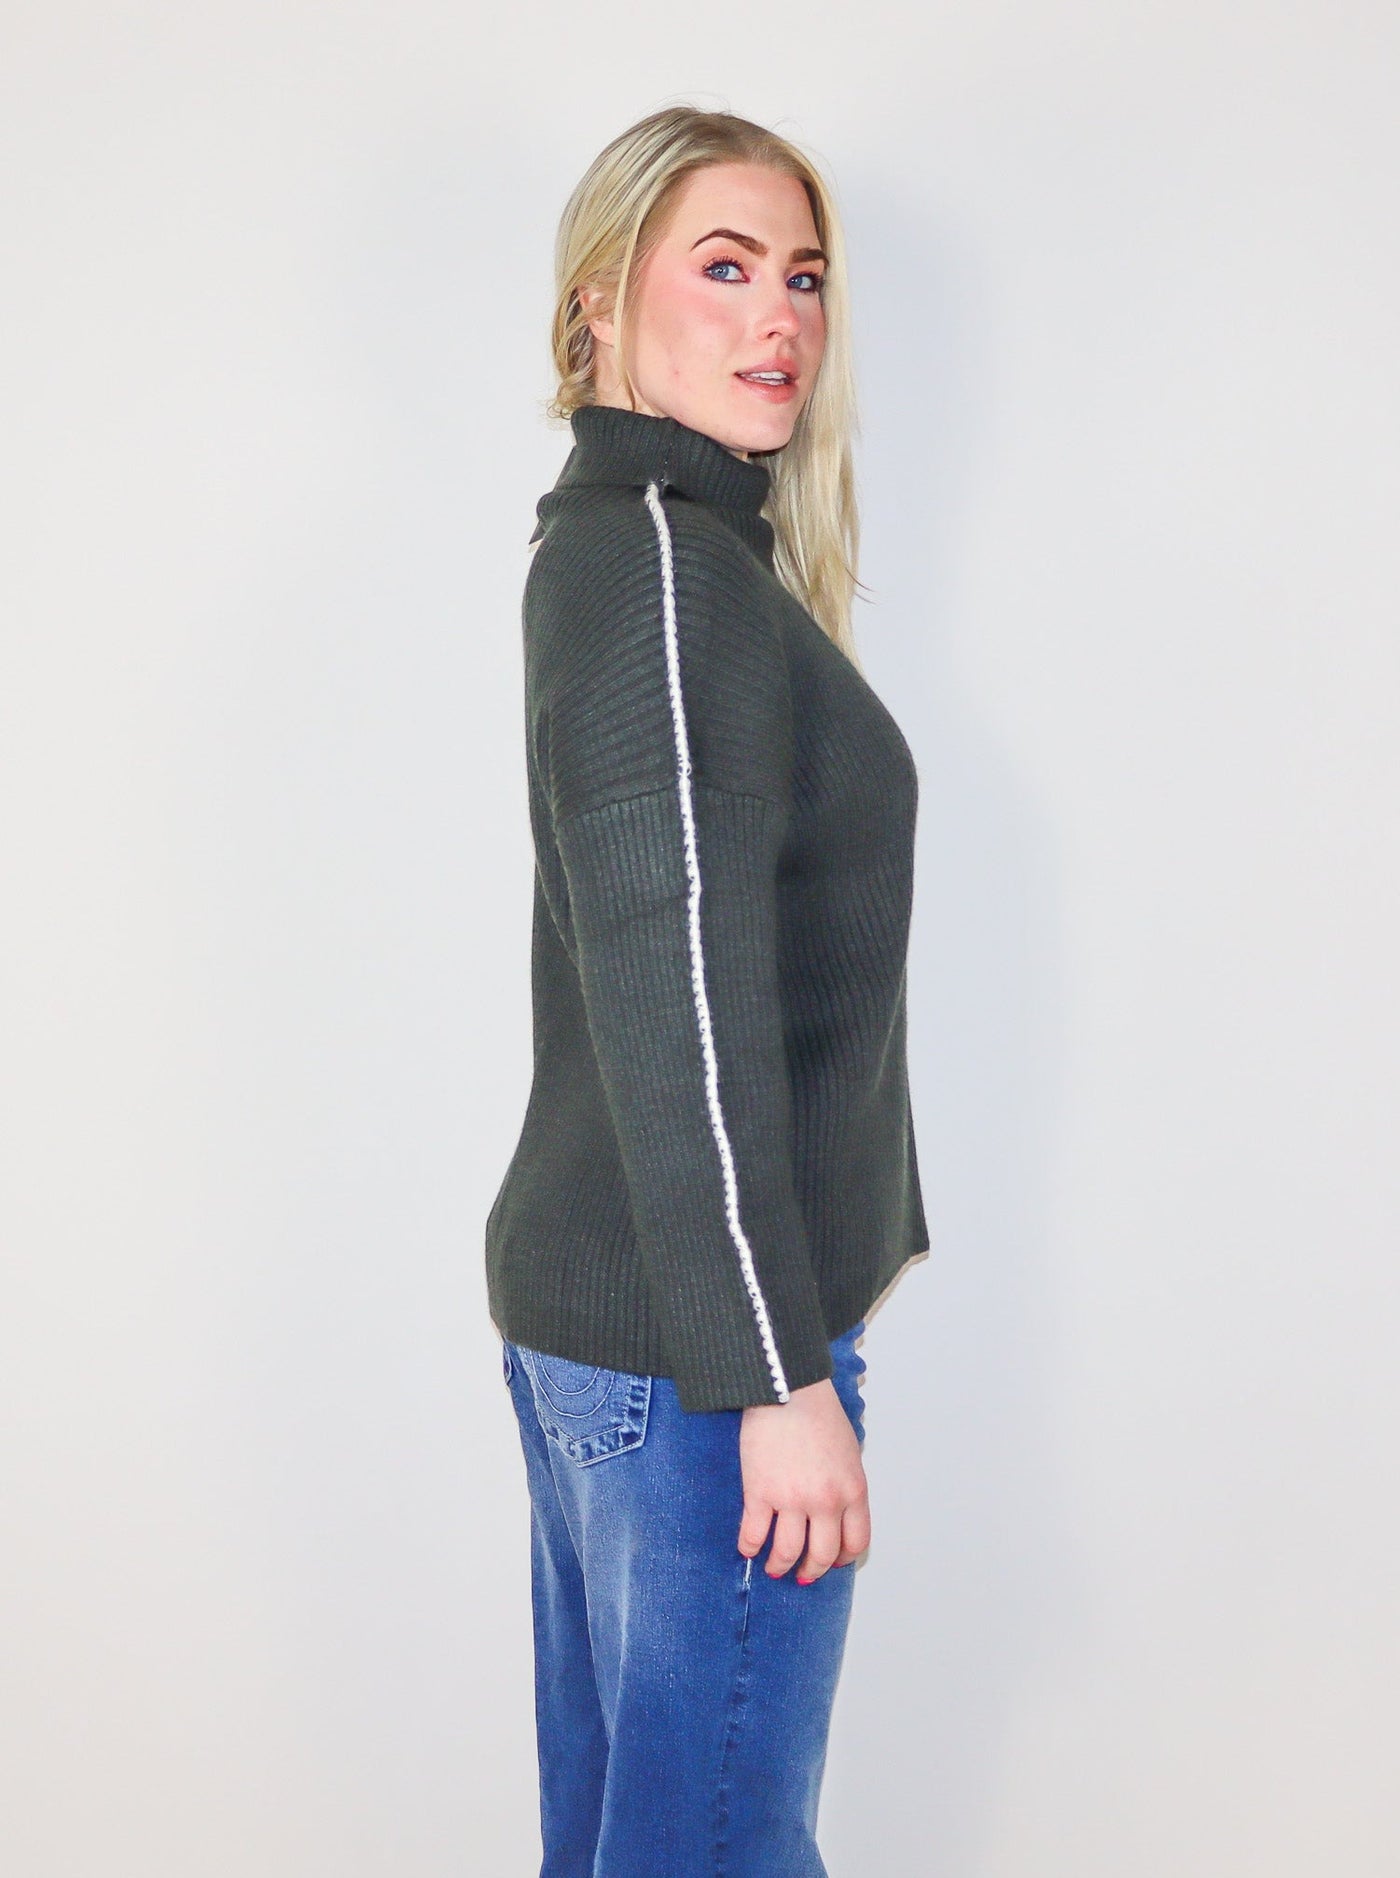 Model is wearing a dark charcoal colored turtle neck sweater with white stitching on the sleeves. 